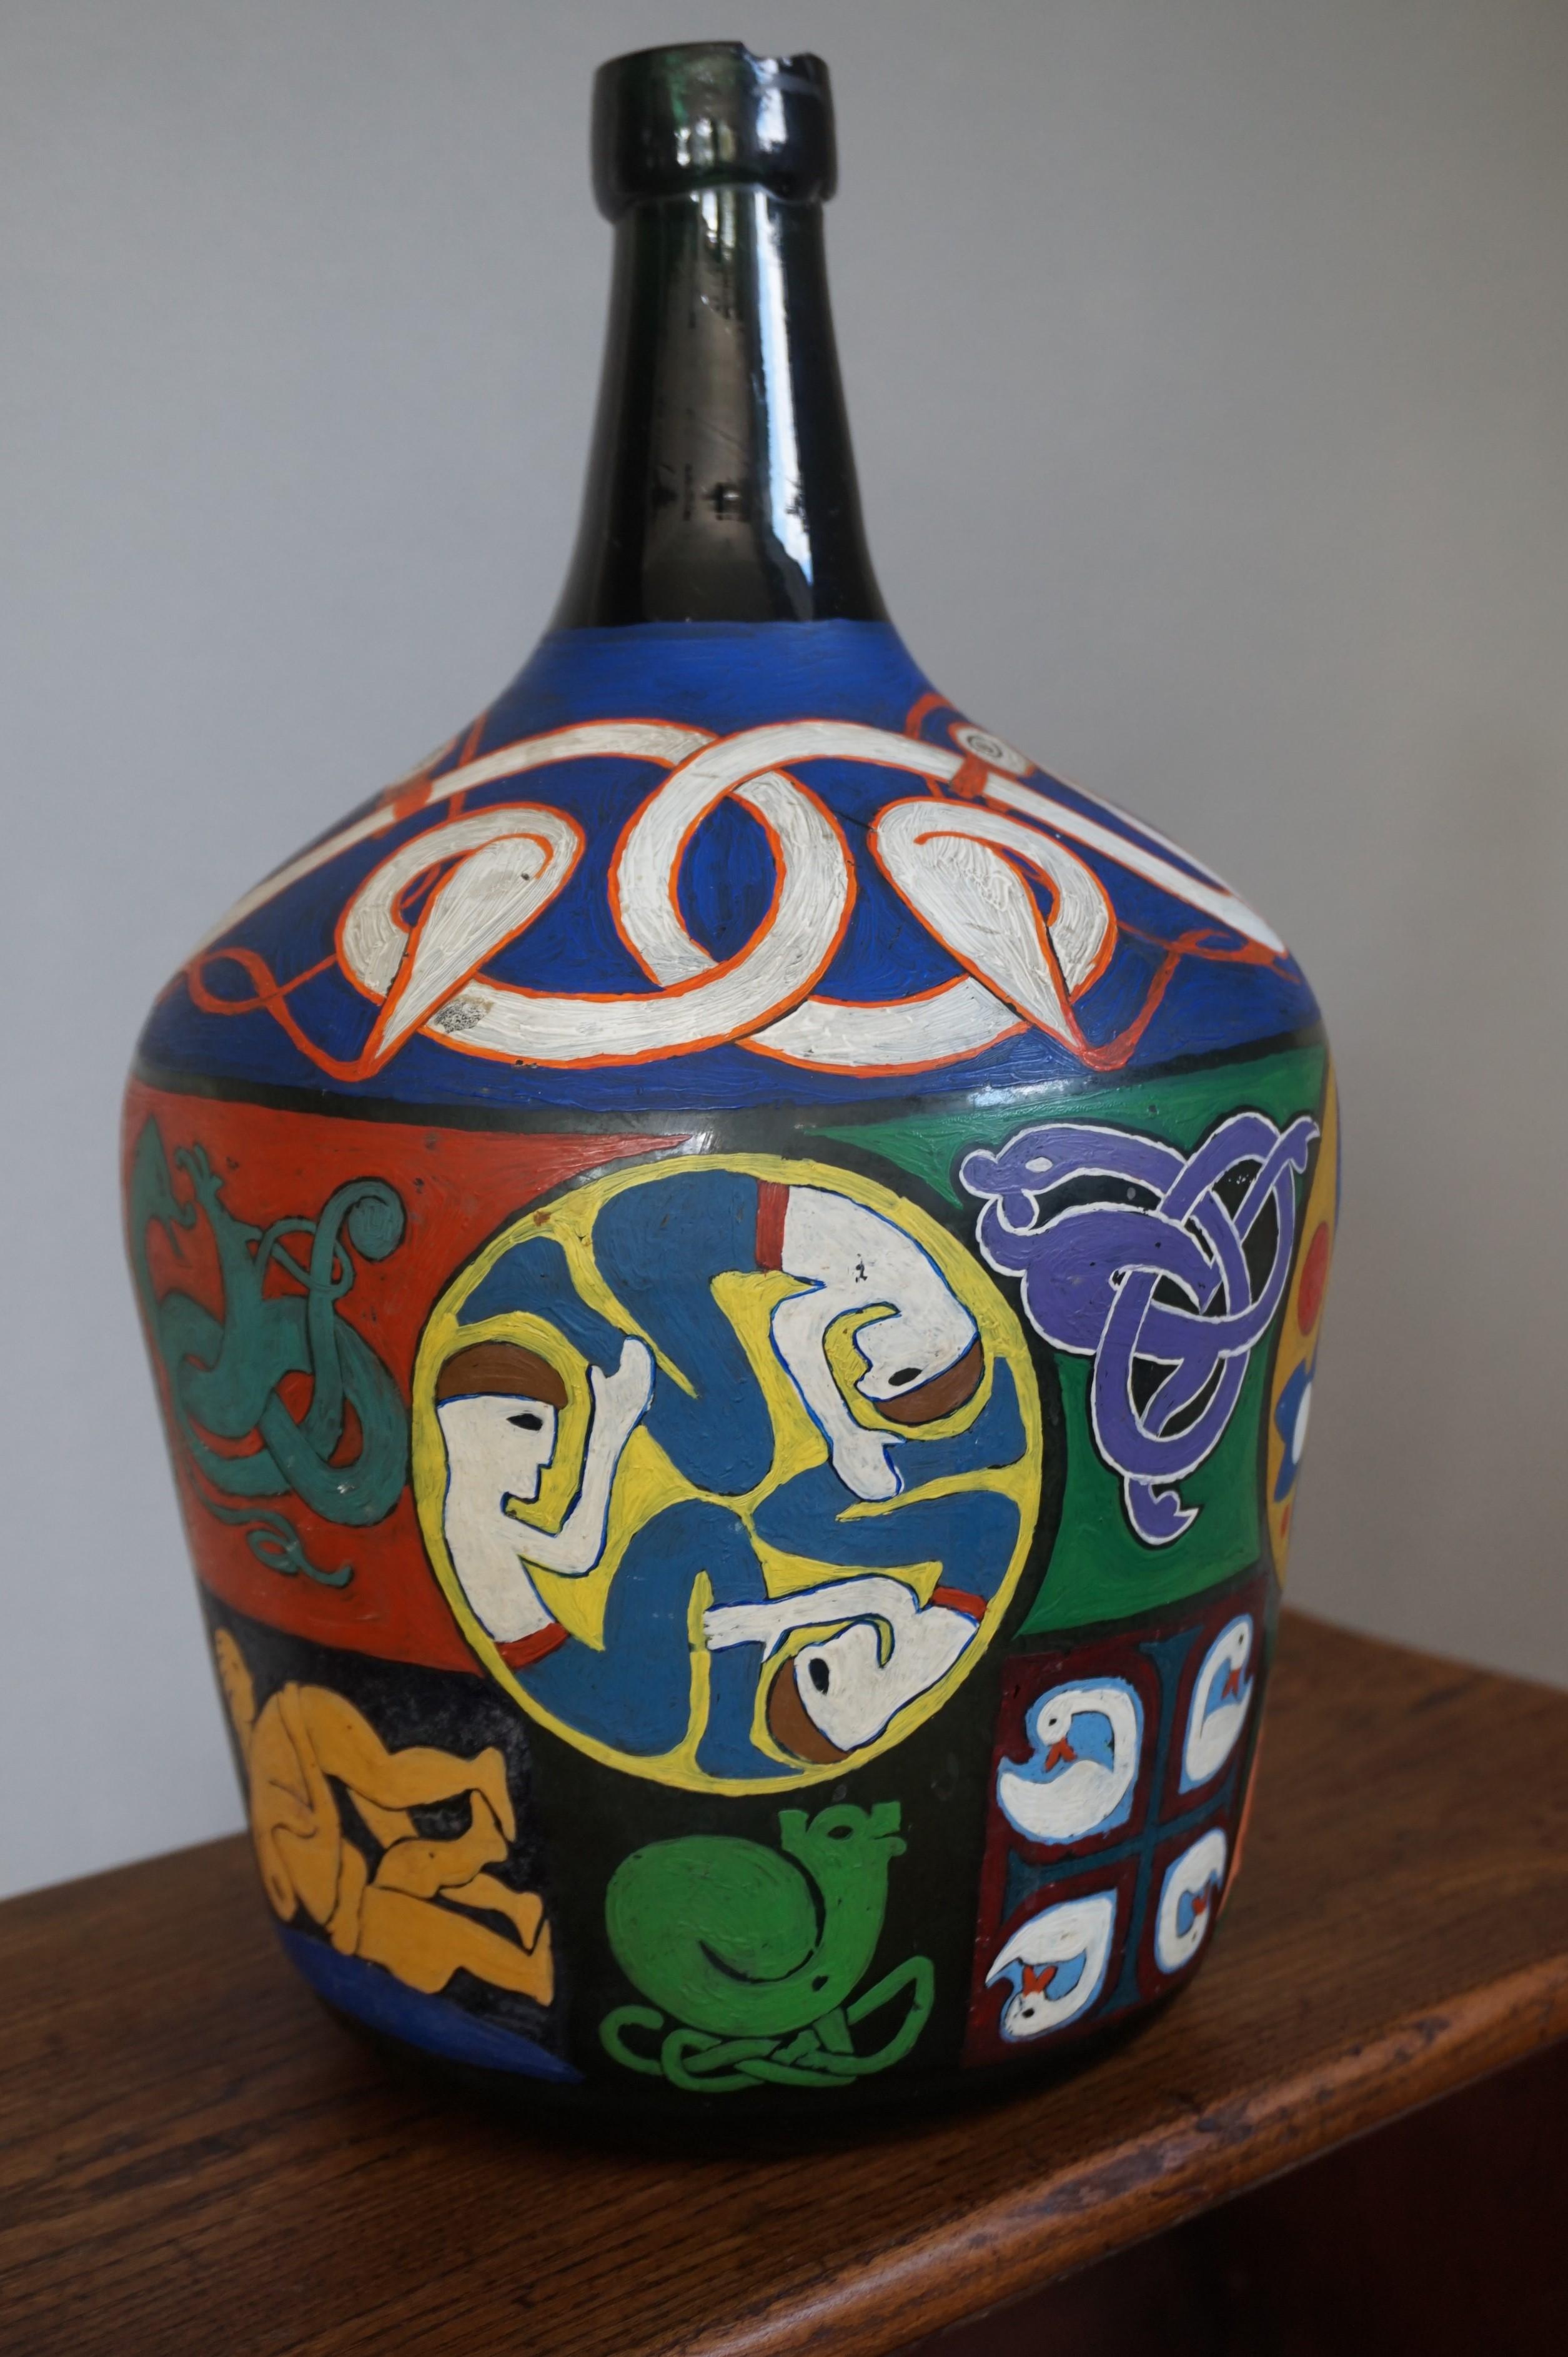 Decorative and Artistic Hand-Painted Bottle Folk Art with Colorful Symbolism For Sale 3